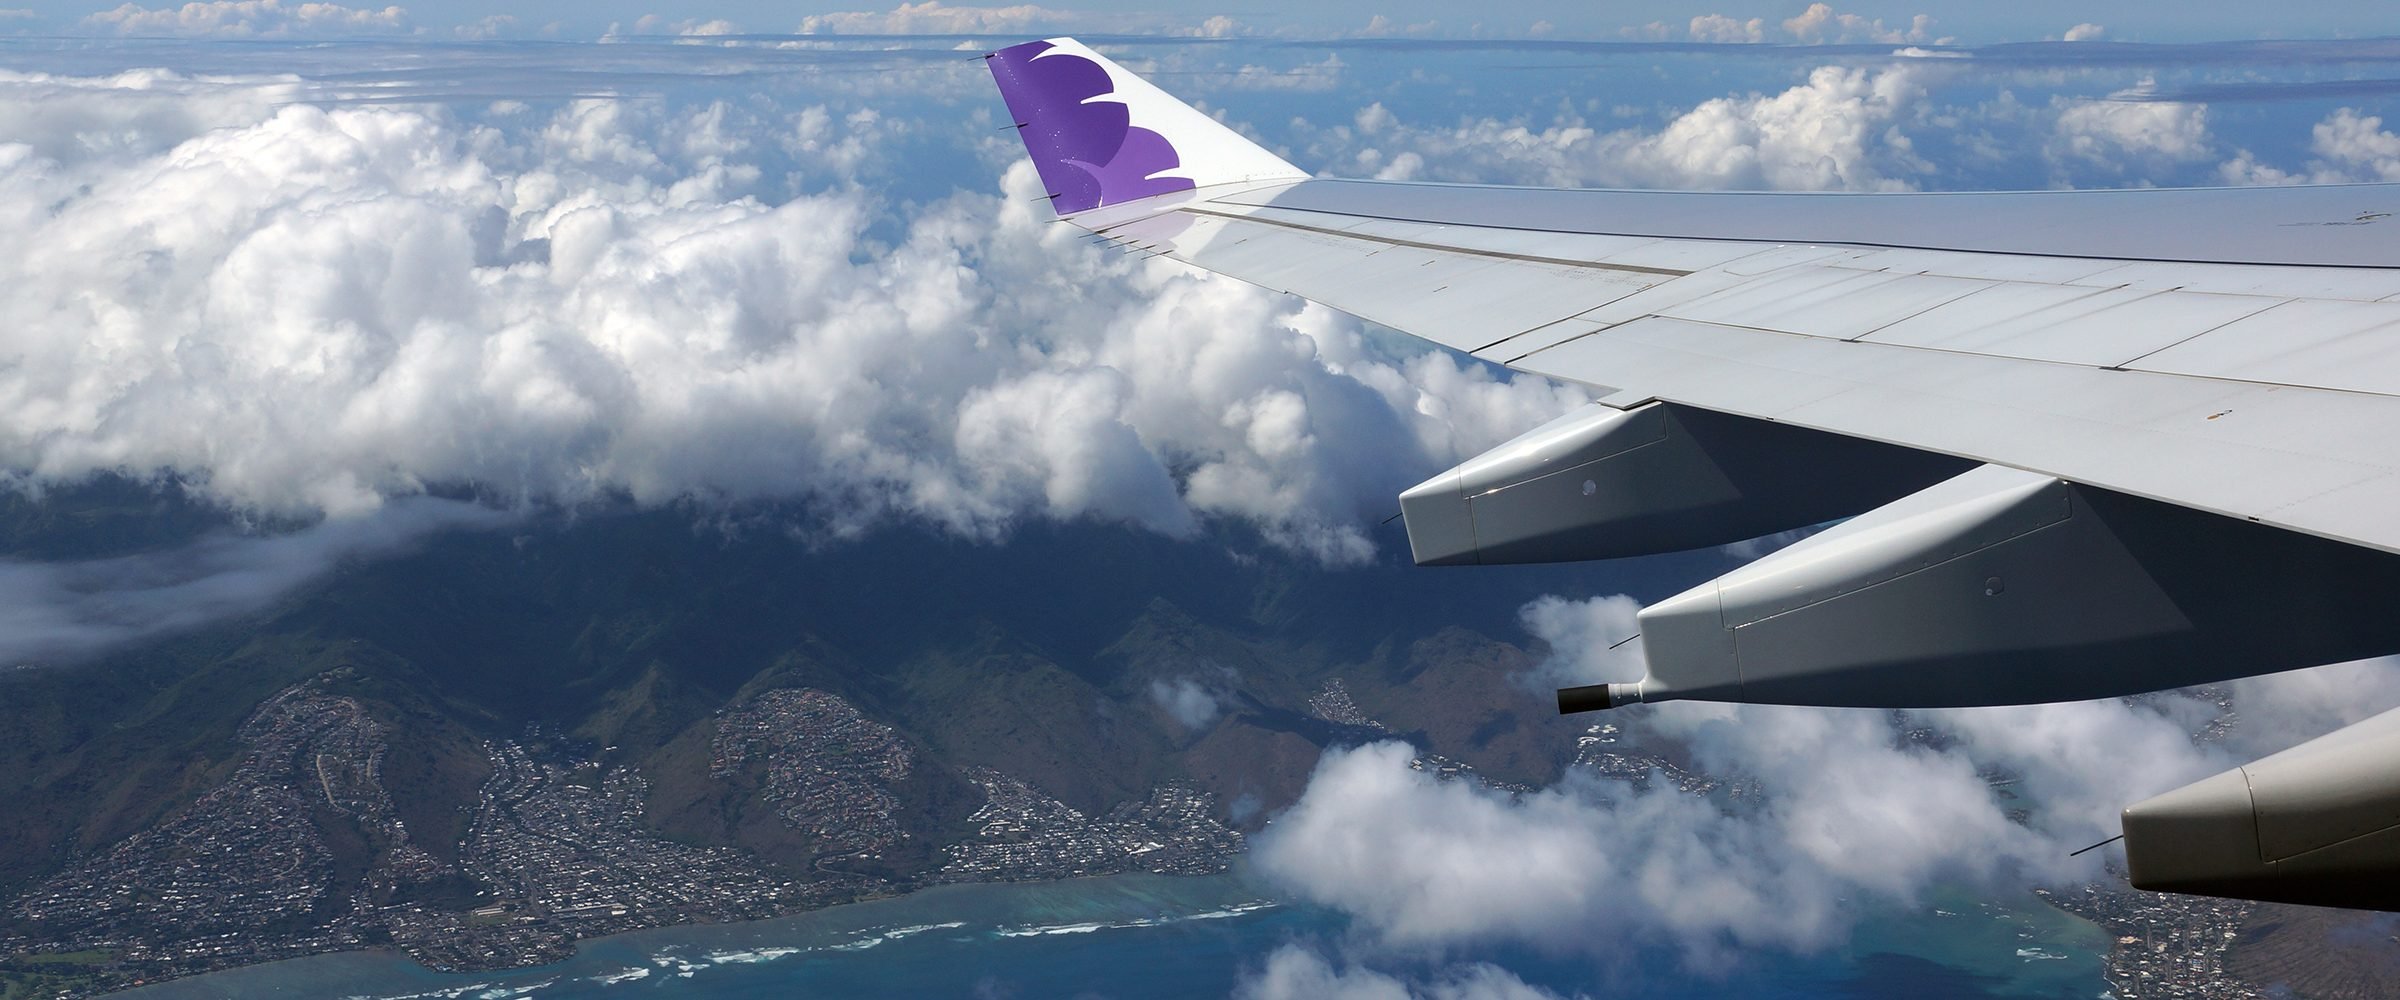 Hawaiian Airlines Extra Comfort: What to Know - NerdWallet